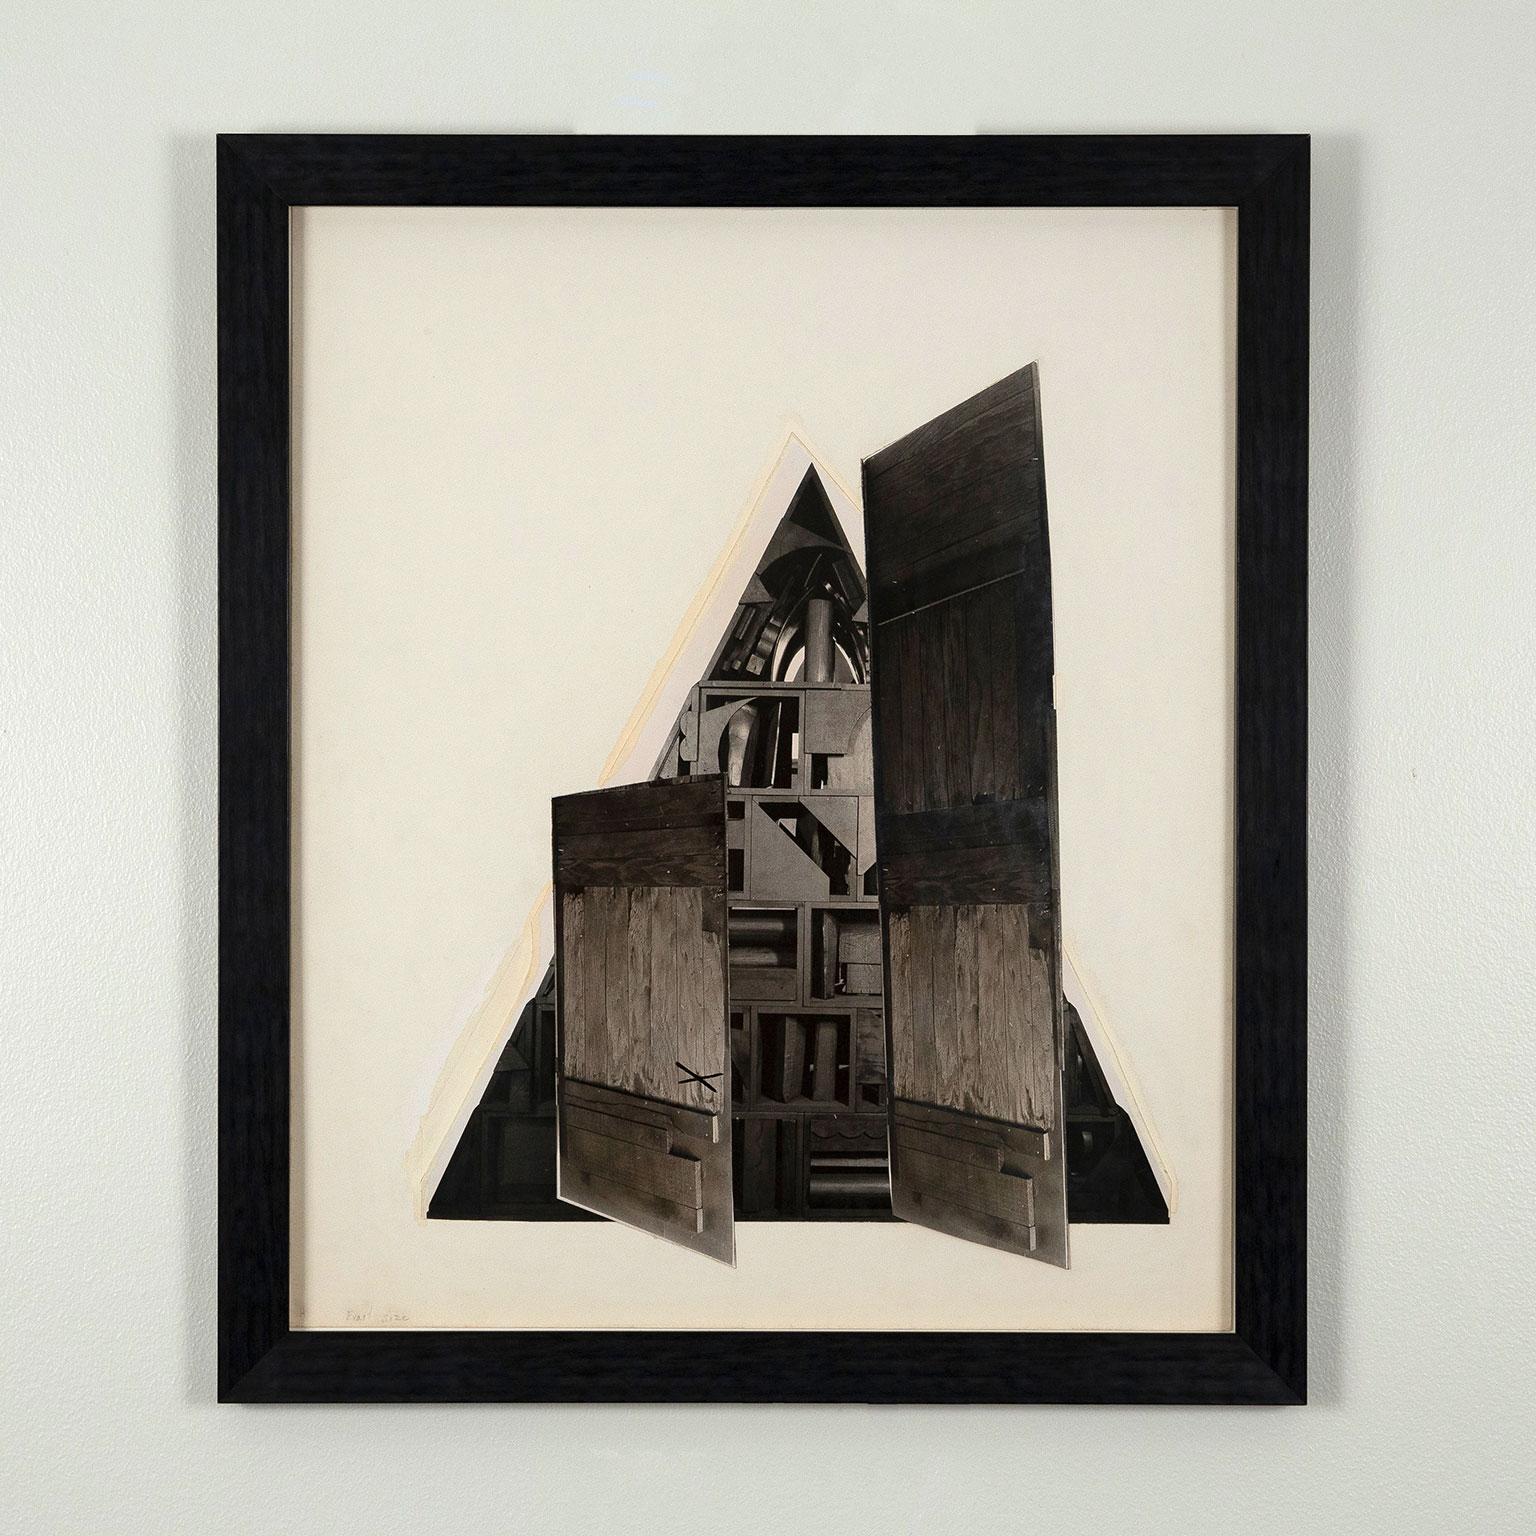 By The Lake - Print by Louise Nevelson